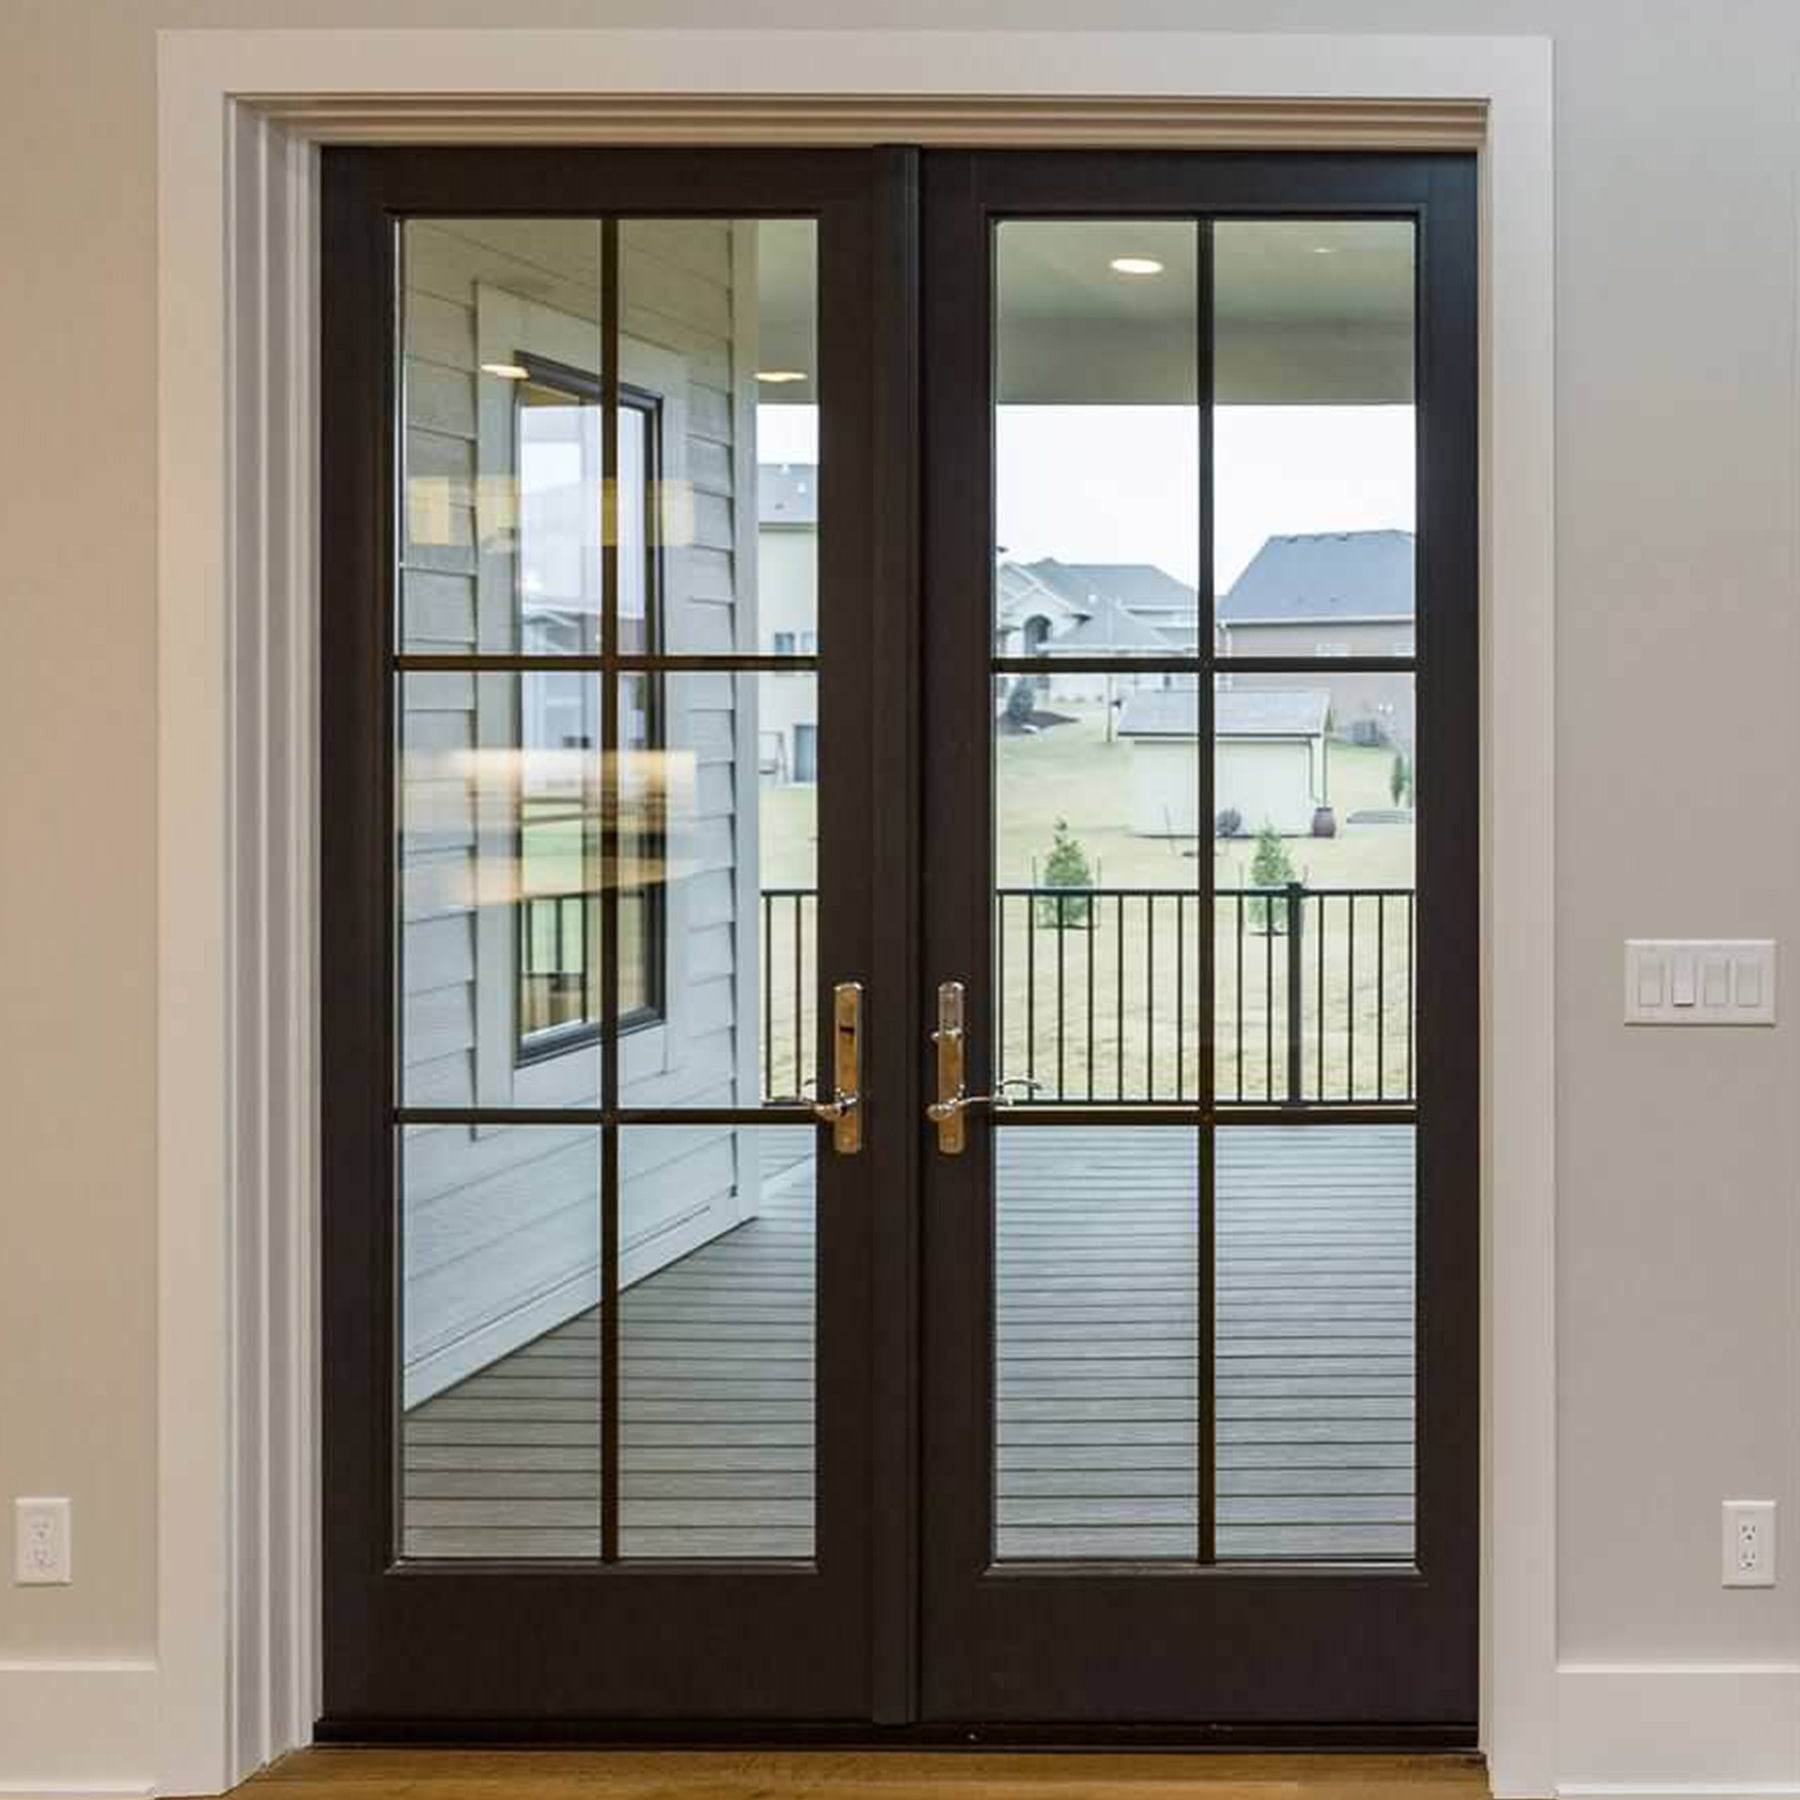 gloryirondoors insulated double entry french exterior doors with matte black finish